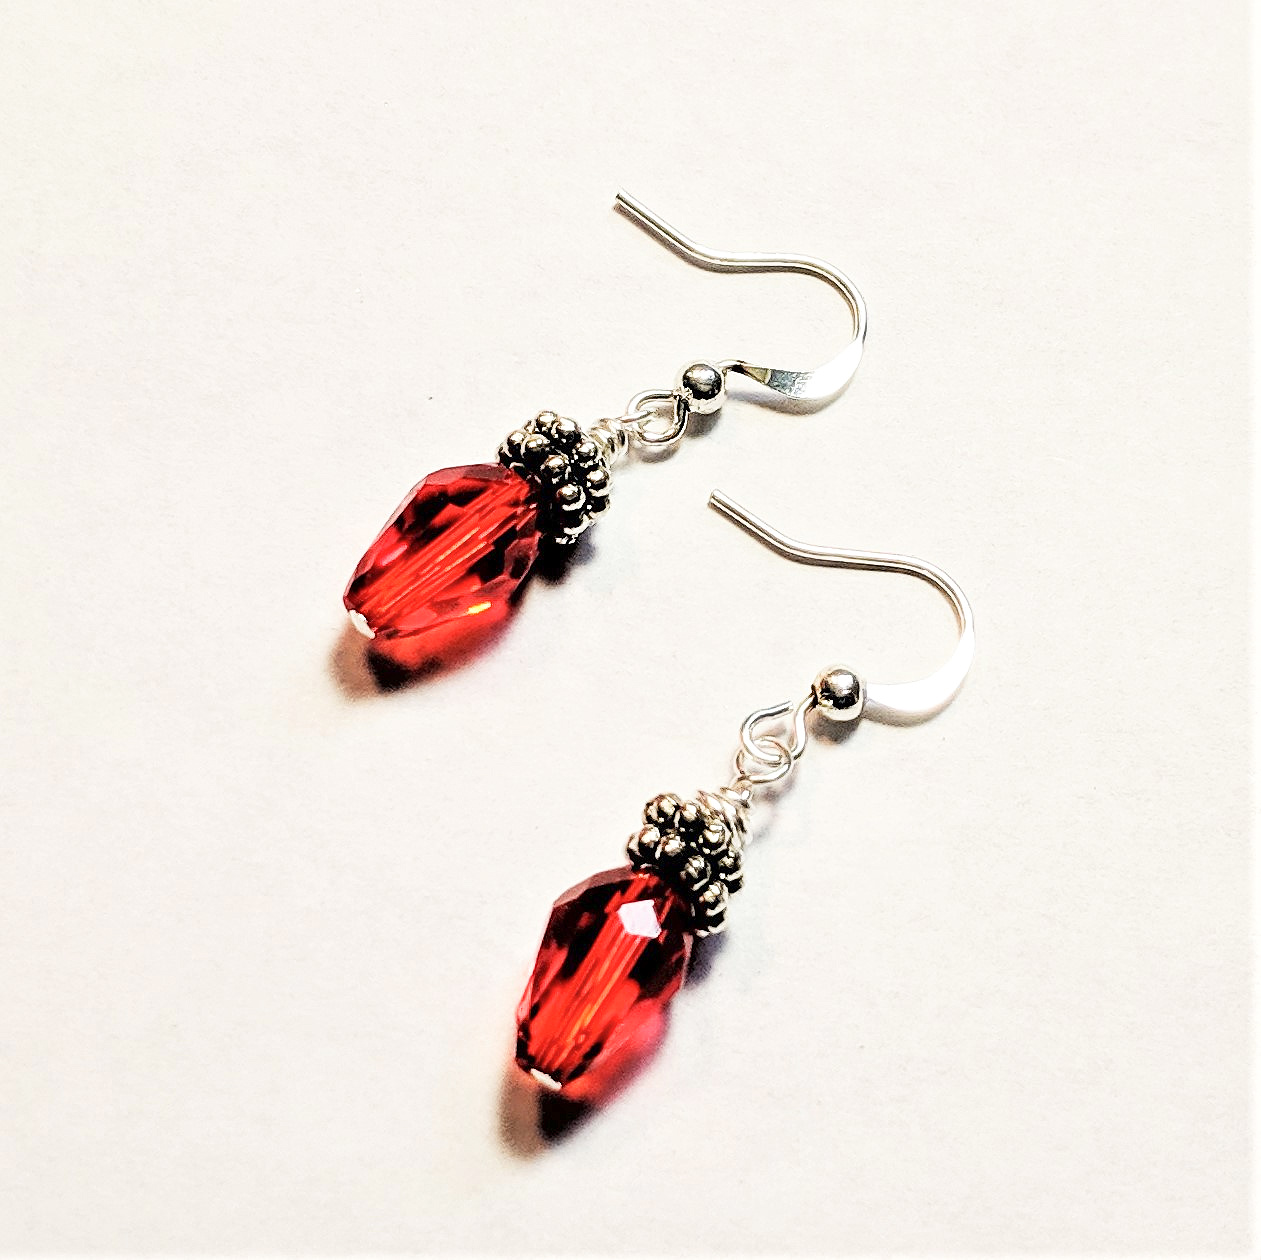 Red Christmas Light Earrings with Tibetan Silver Accents